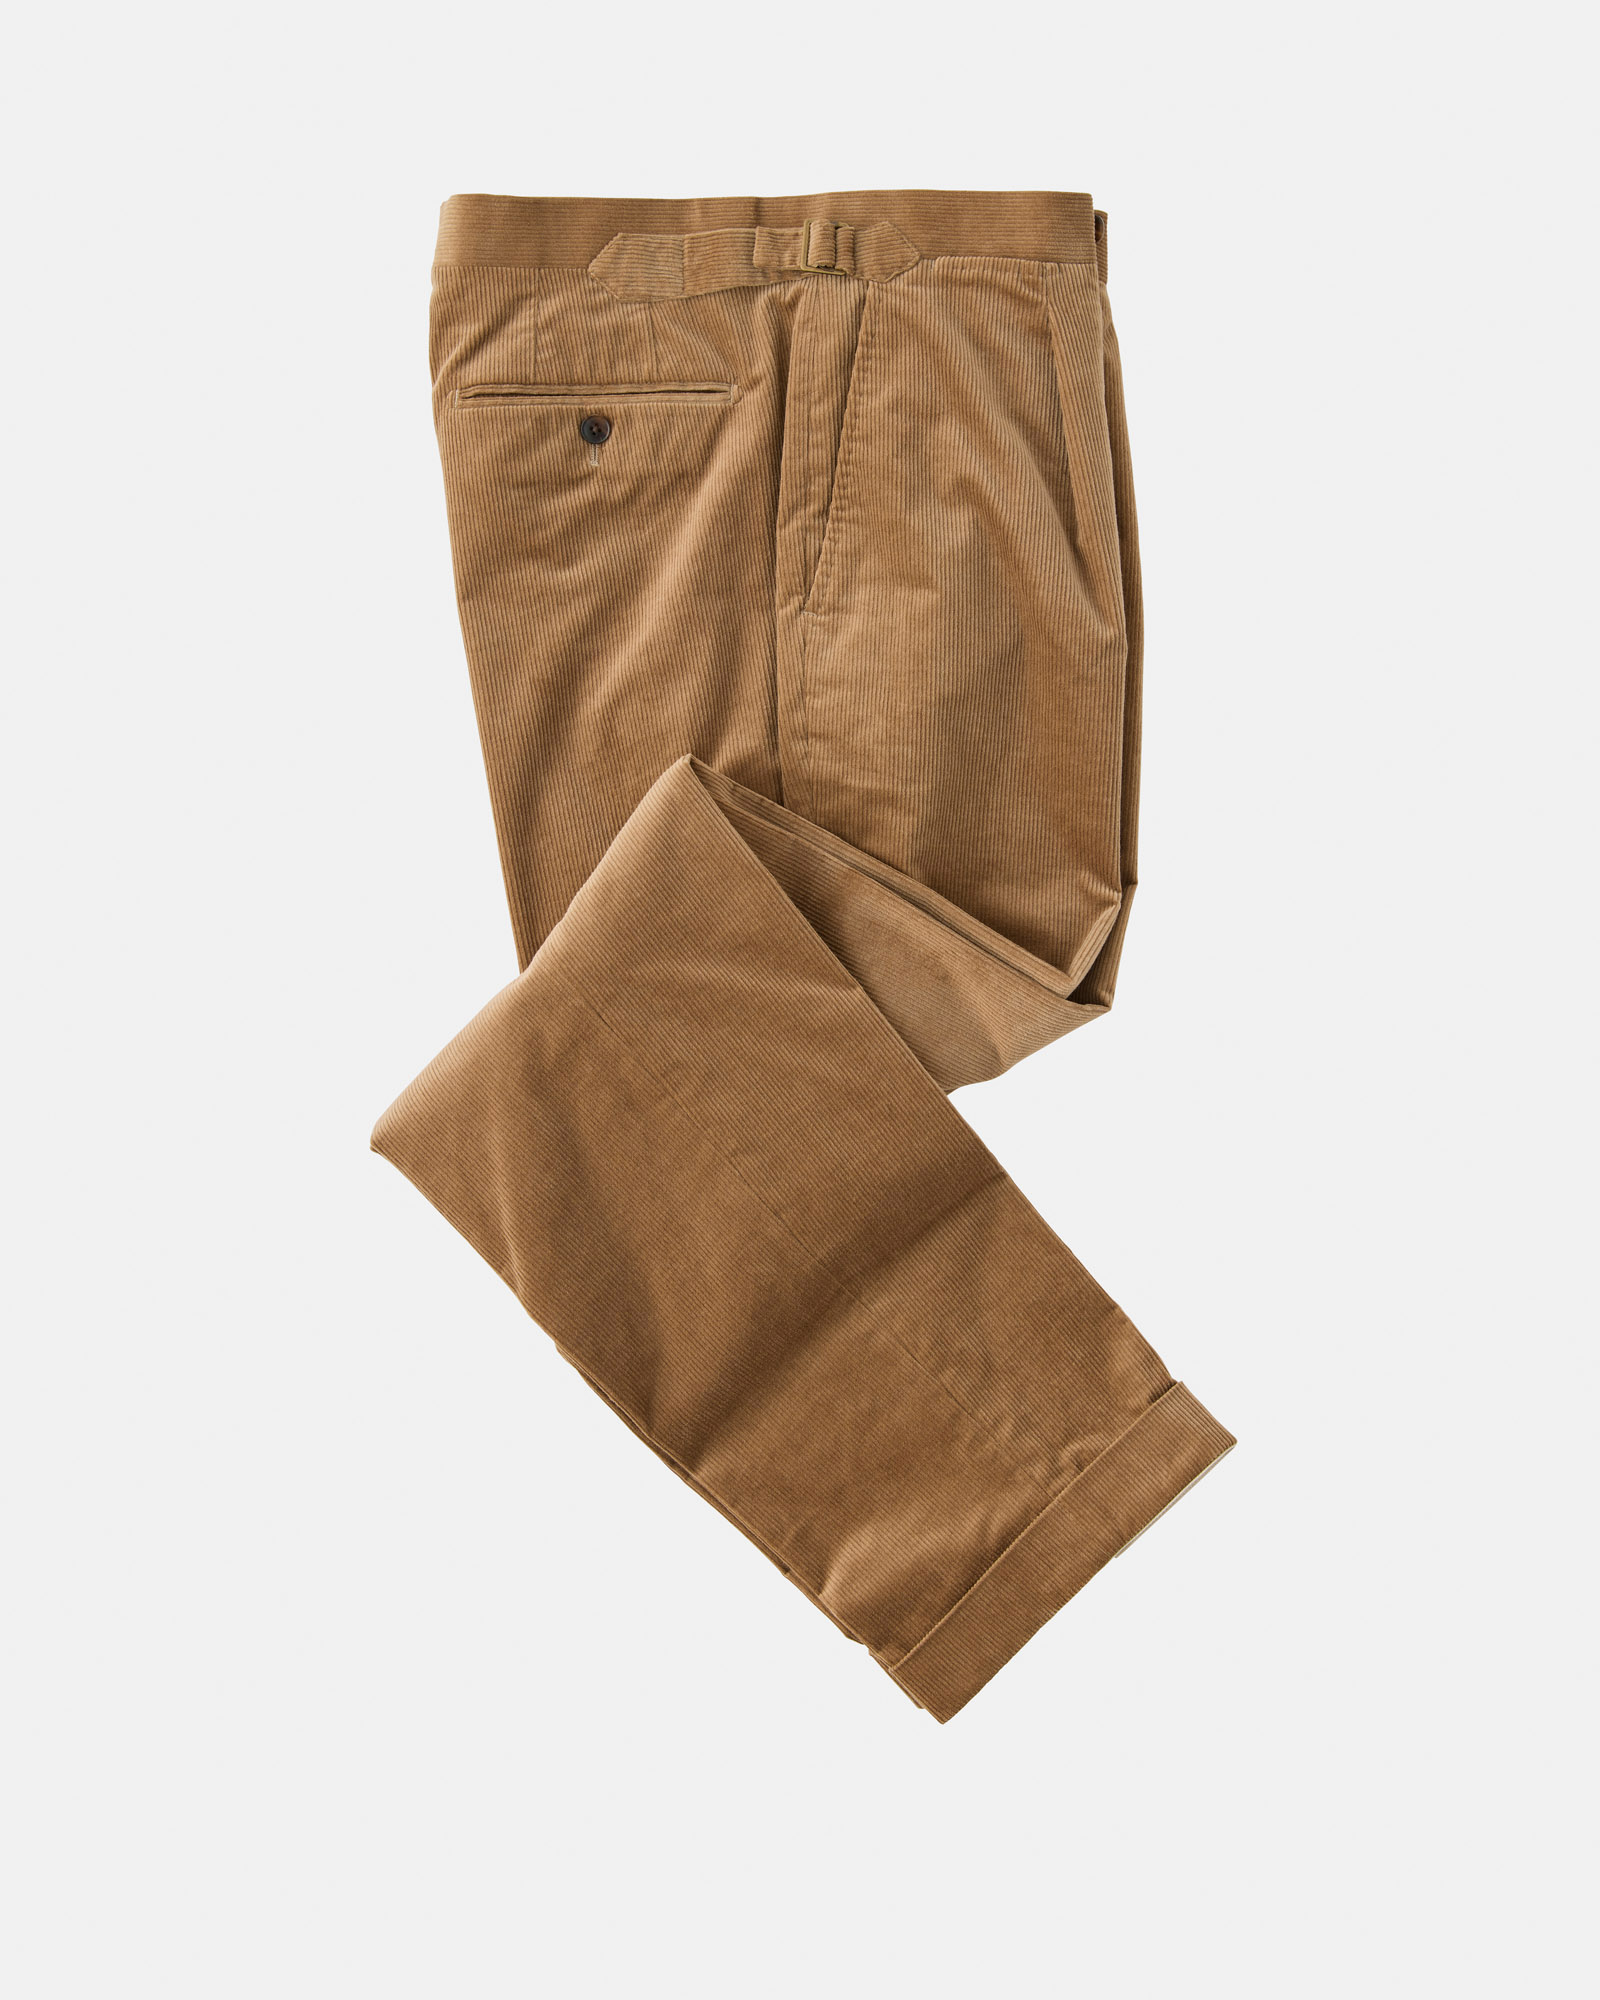 Women's Cord Trouser from Crew Clothing Company